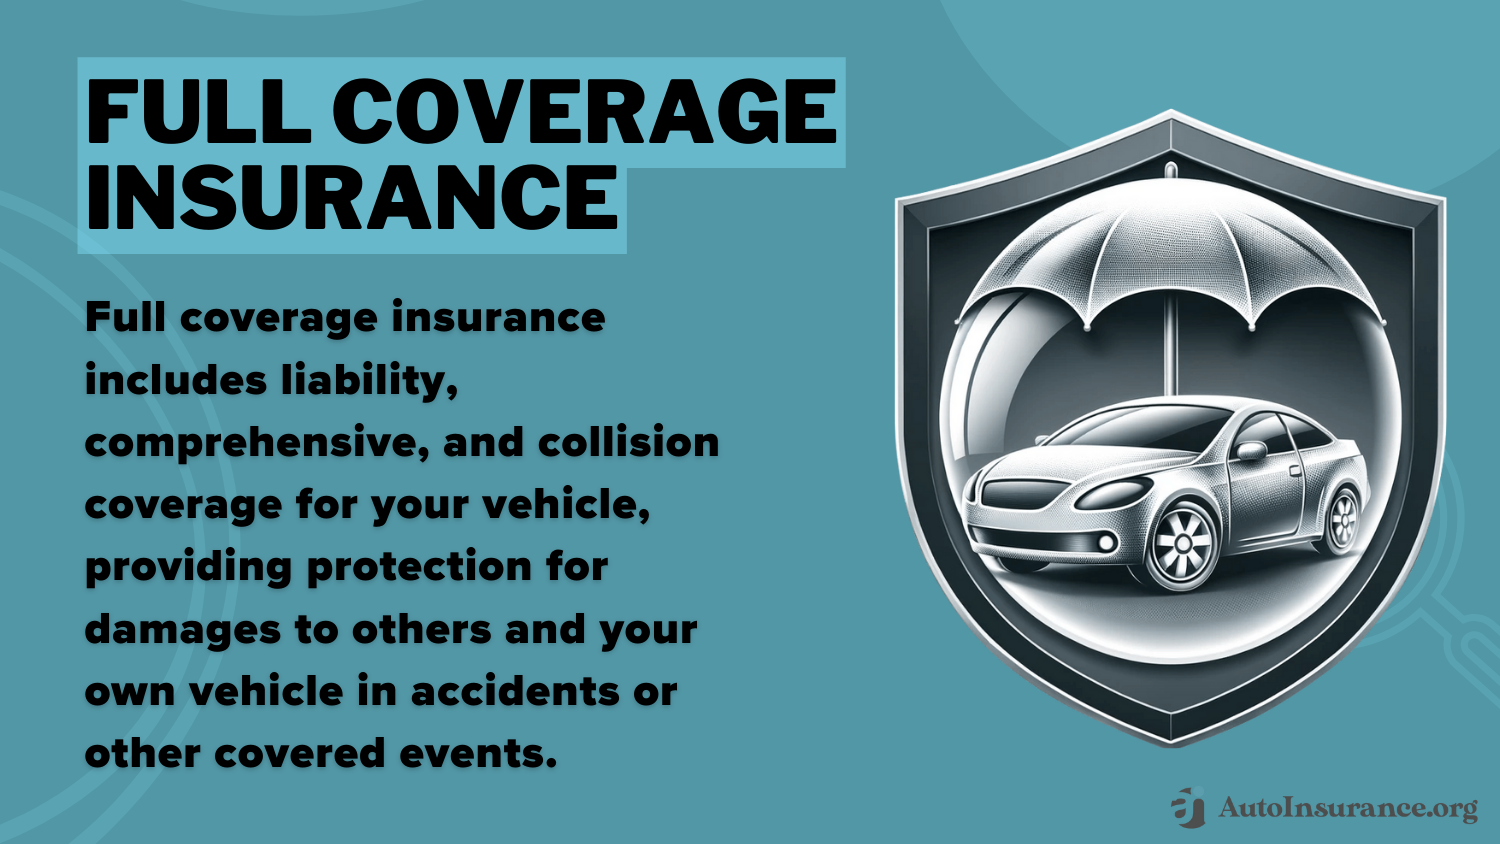 Geico Auto Insurance Review: Full Coverage Insurance